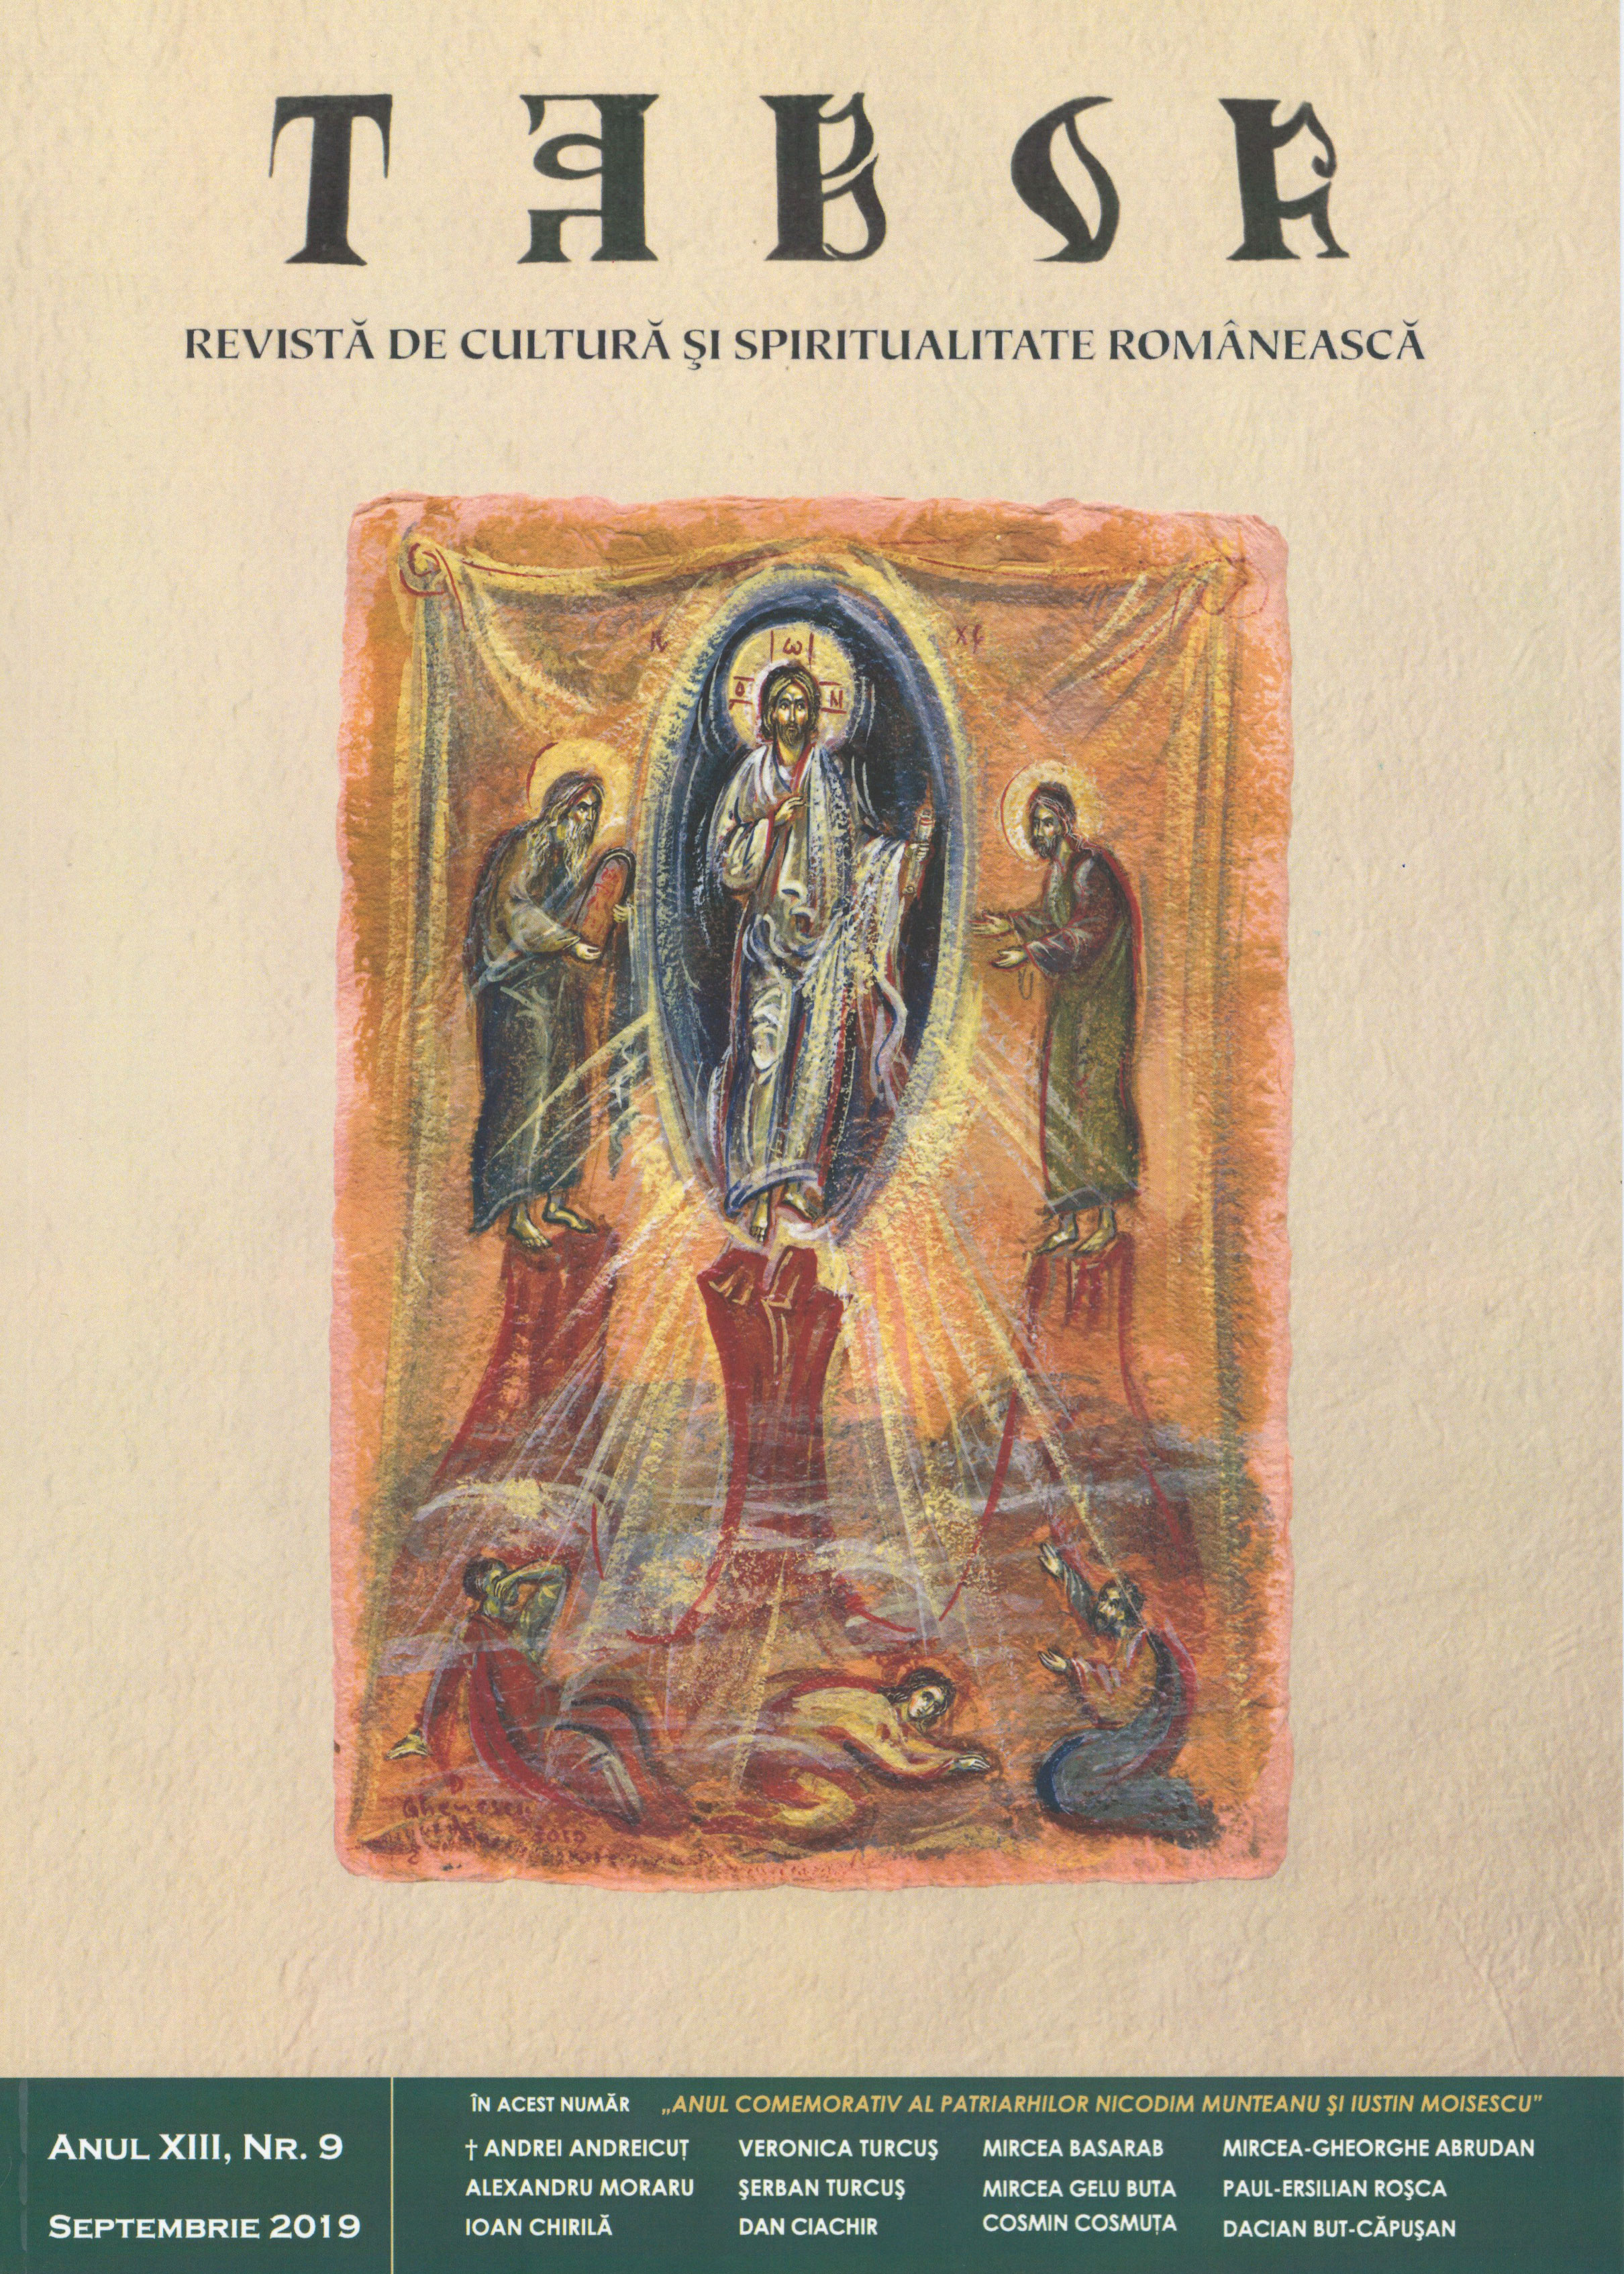 Some major ideas found in Nicodim Munteanu speeches on his ascending to the dignity of bishop of Huşi and that of metropolitan of Moldova and Suceava Cover Image